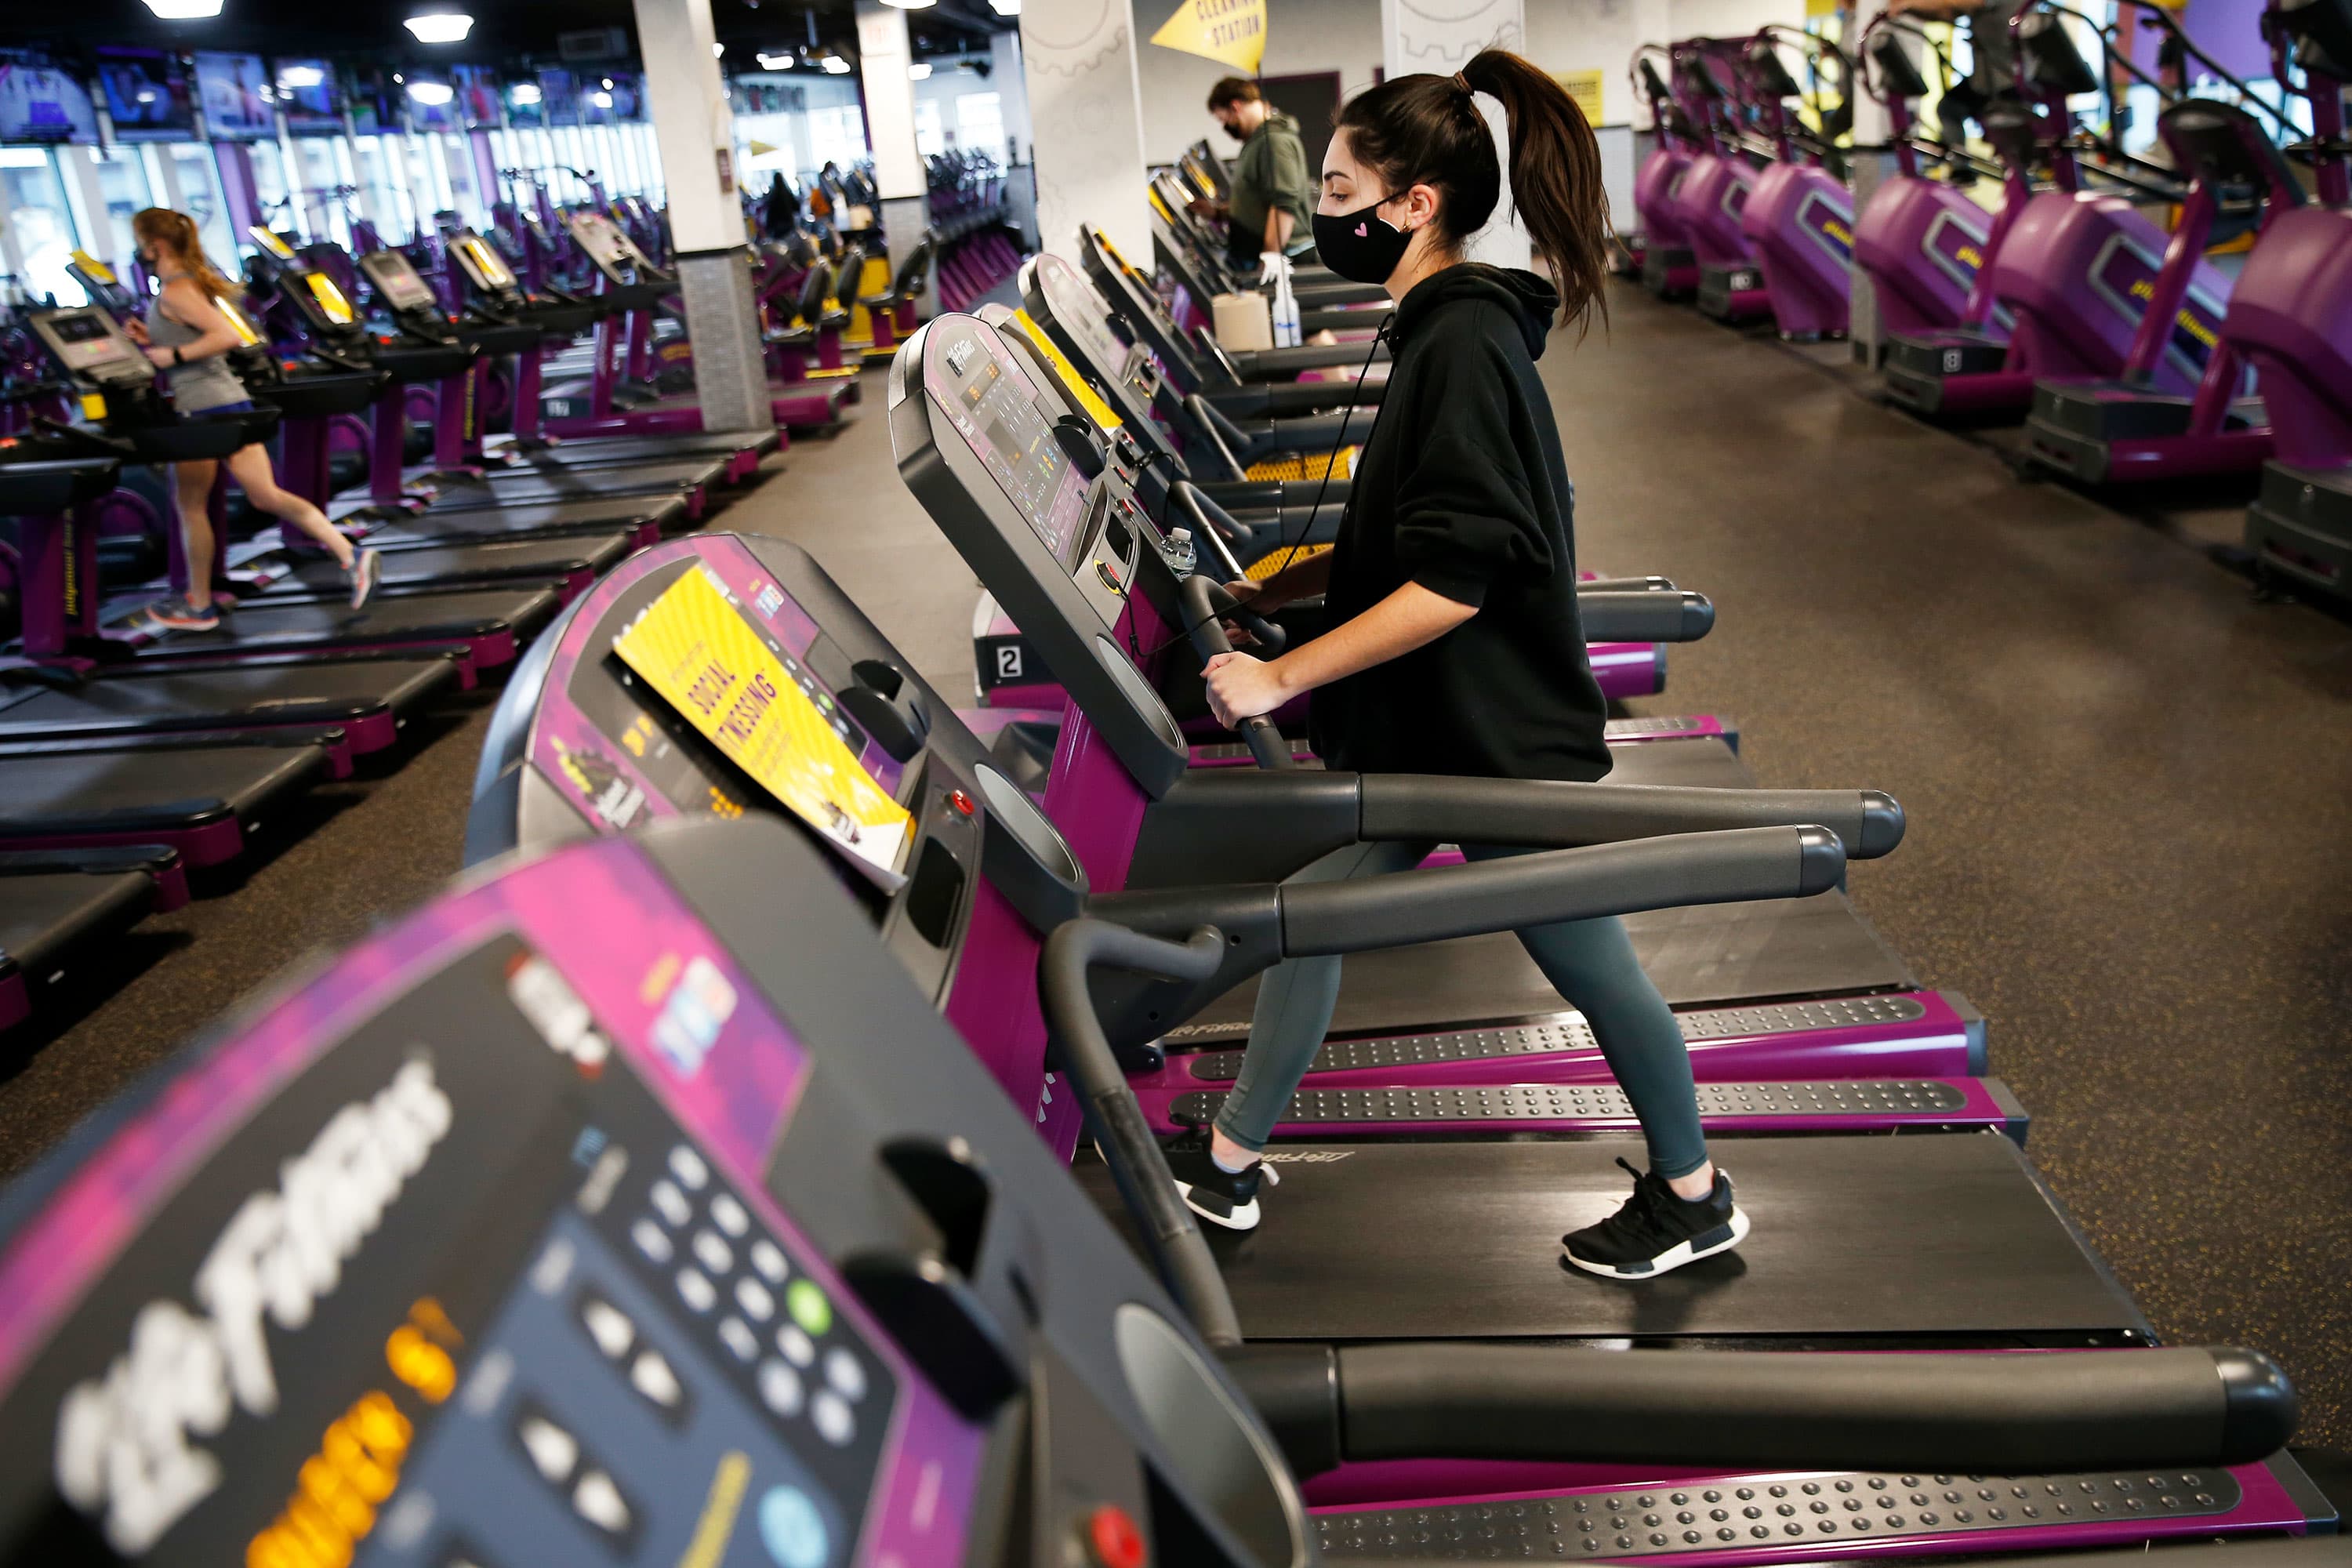 Planet Fitness to buy franchisee Sunshine Fitness in 0 million deal